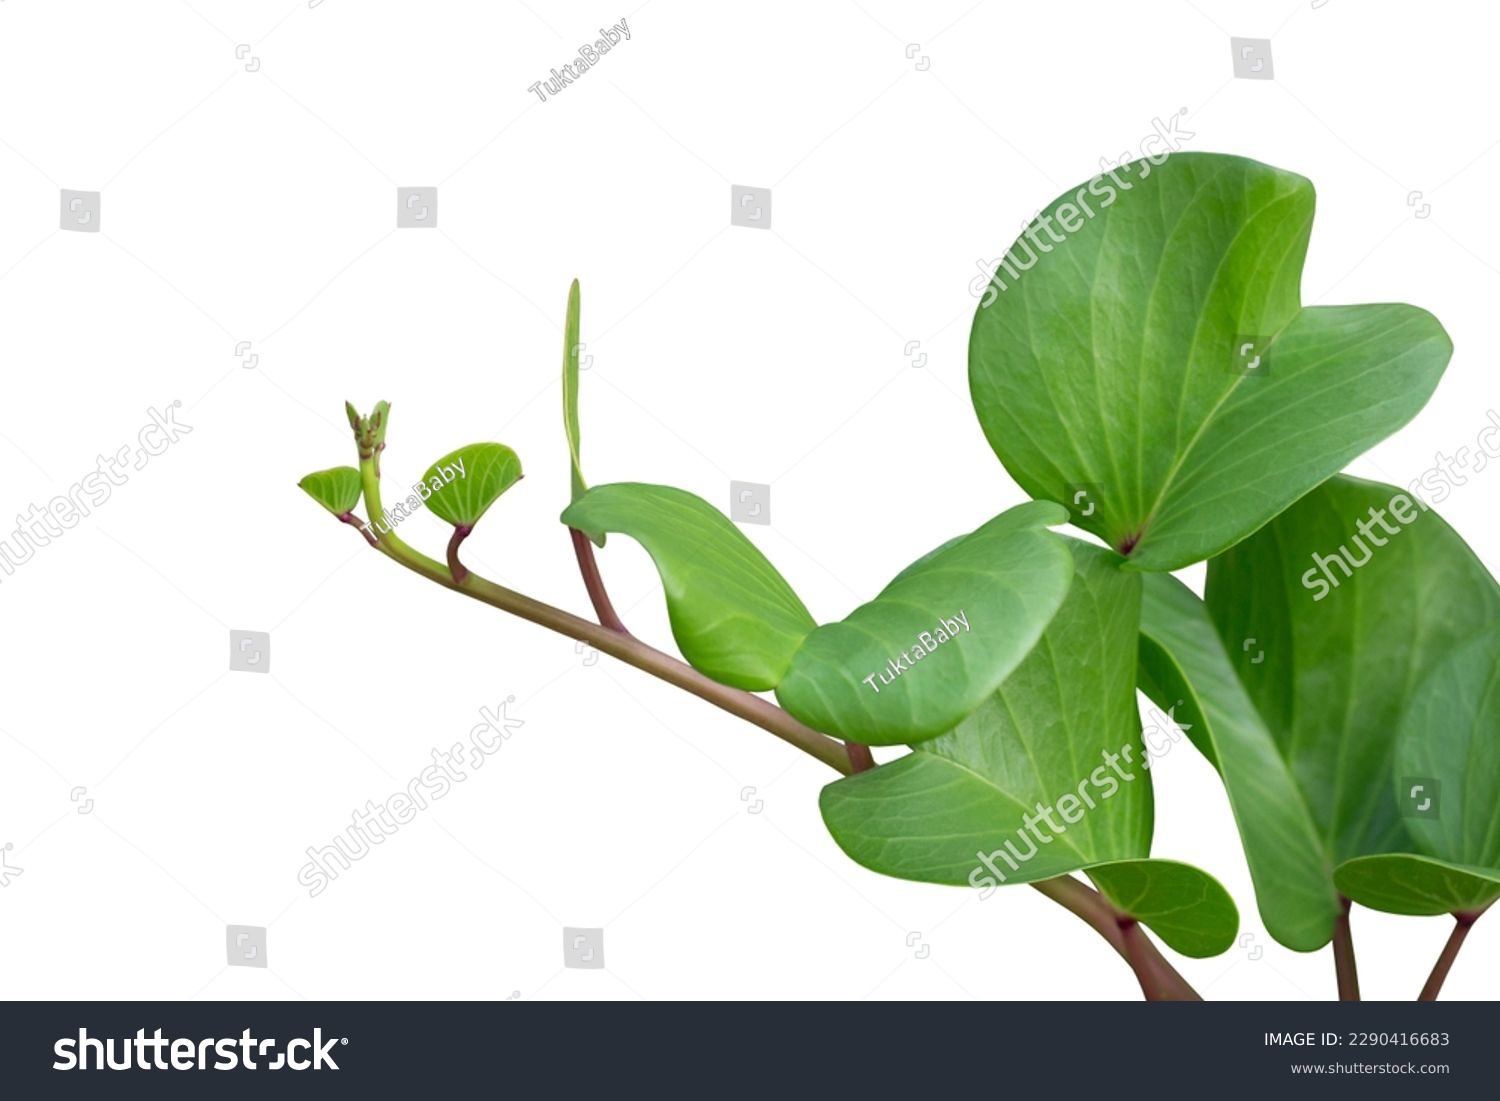 Goat’s foot creeper, Beach morning glory or Ipomoea pes-caprae is a Thai herb isolated on white background included clipping path. #2290416683